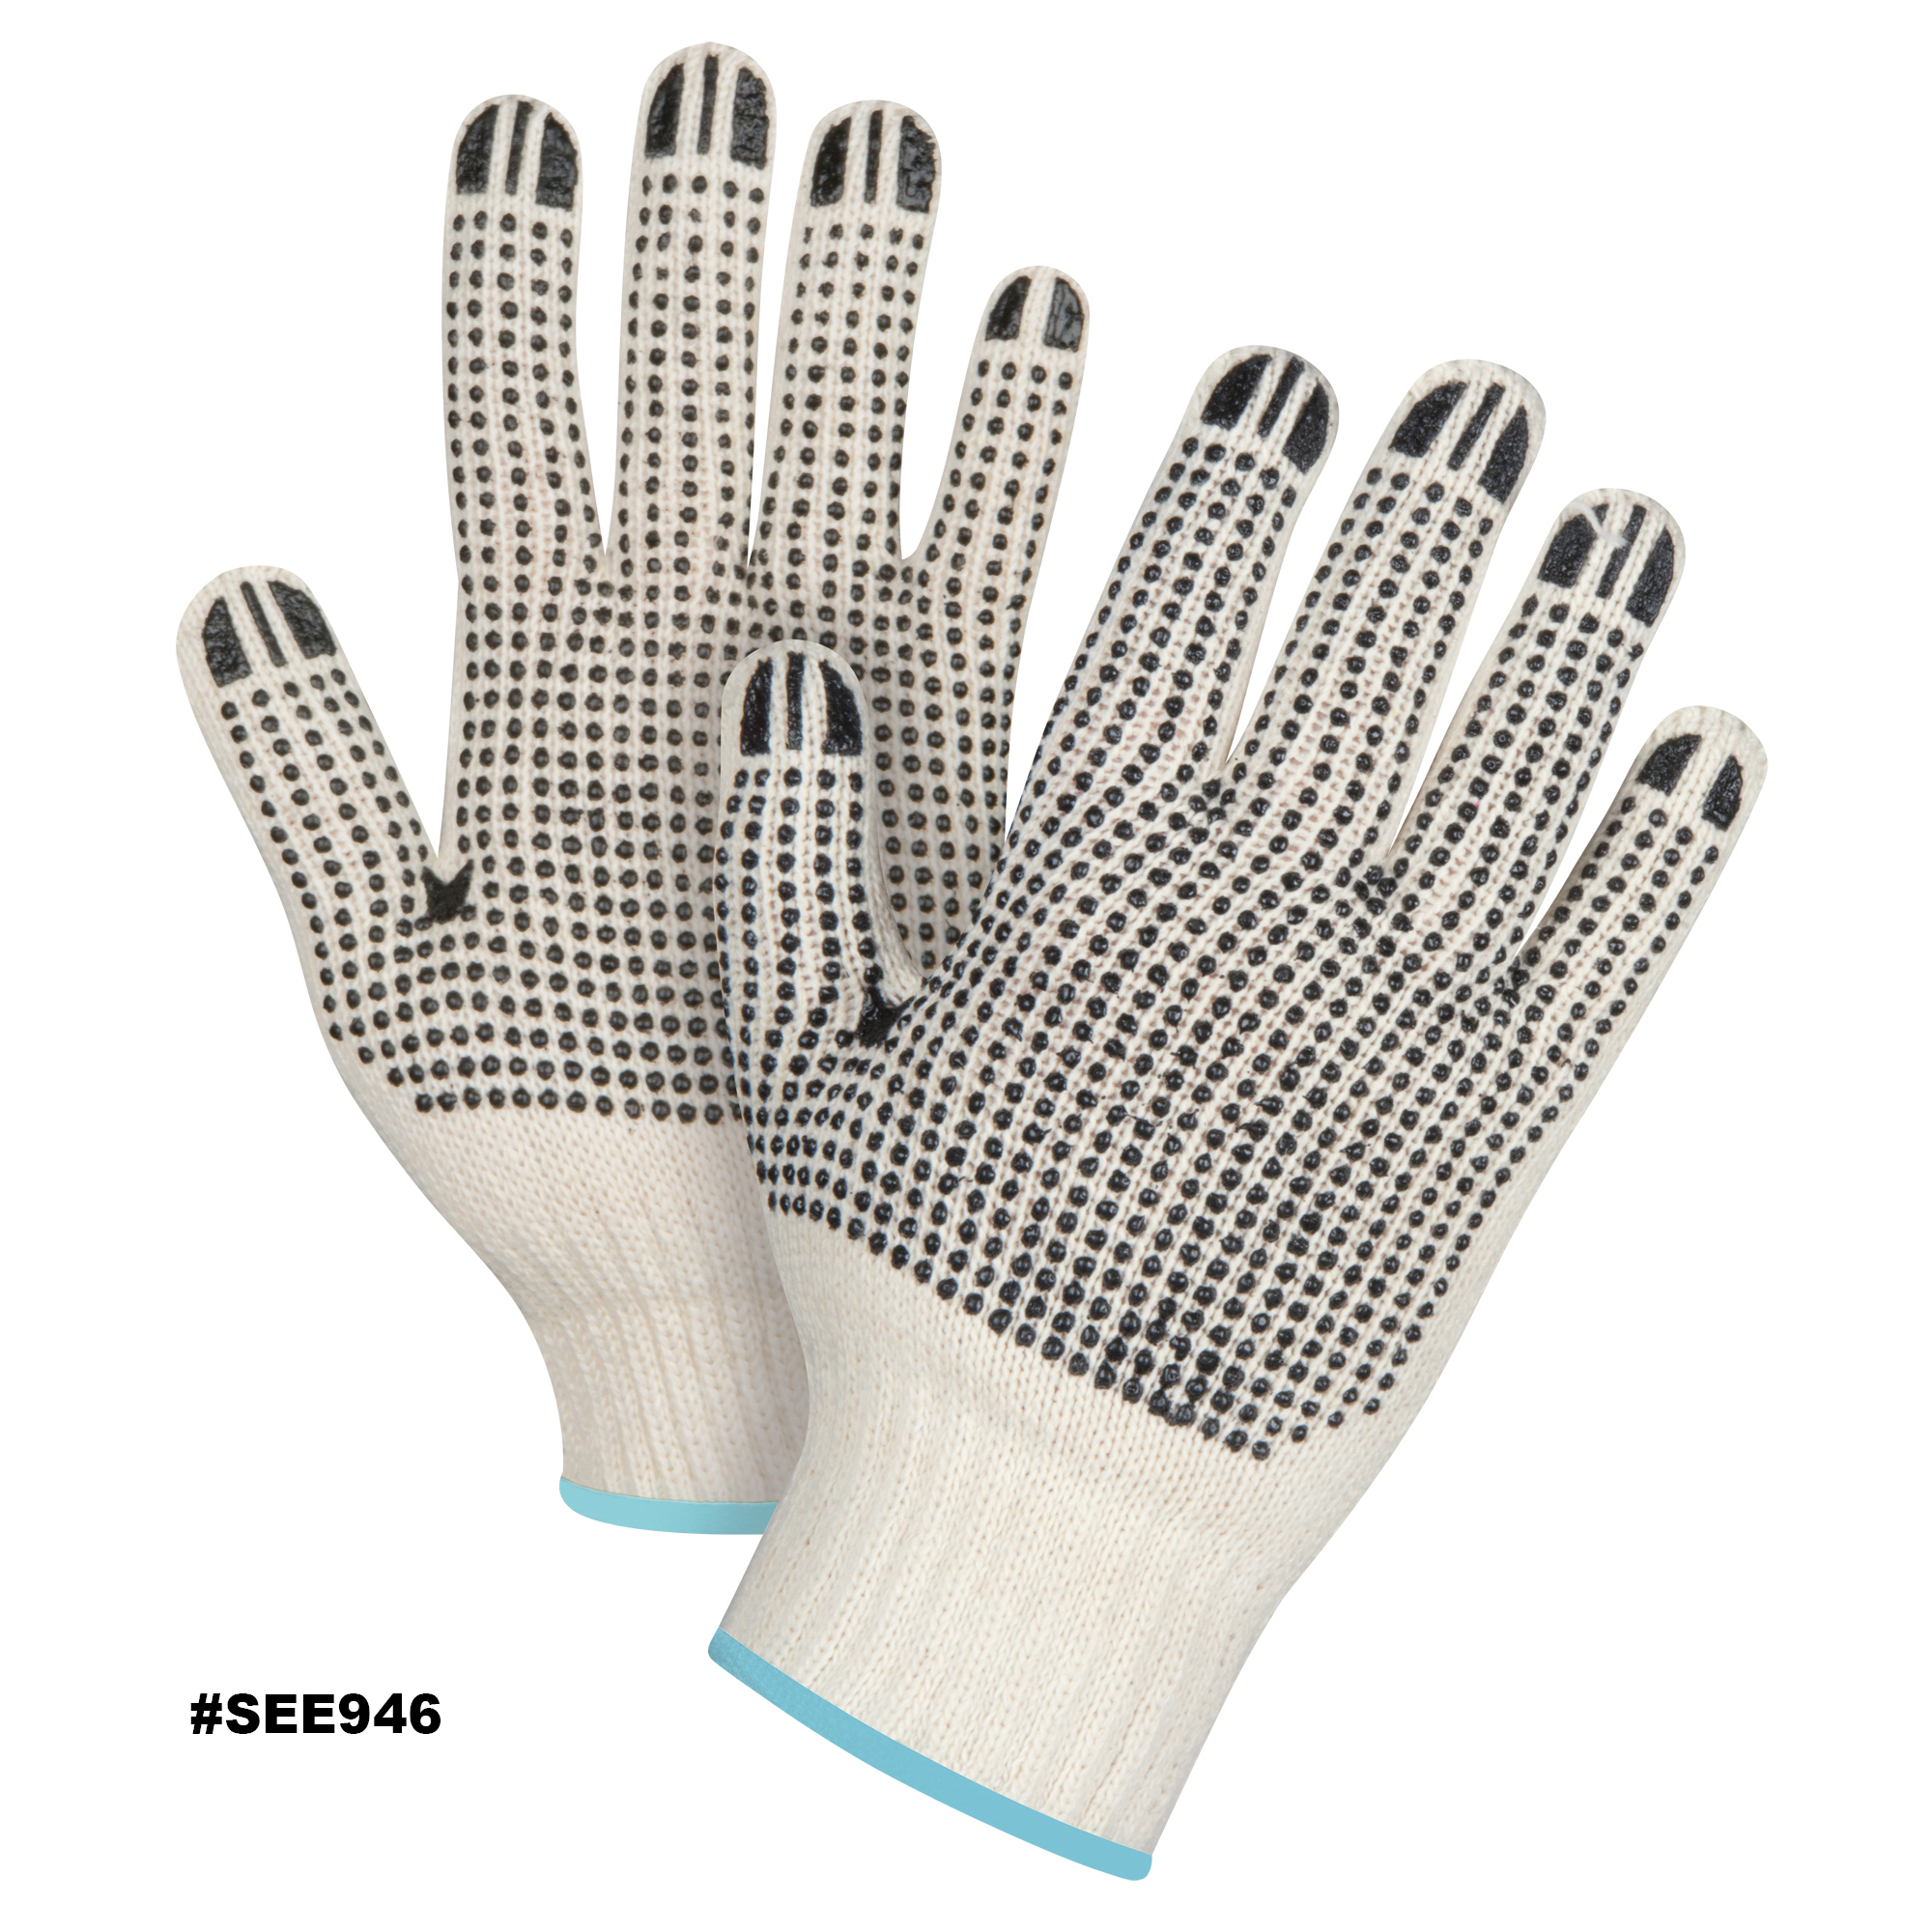 Zenith Dotted Gloves, Poly/Cotton, Double Sided, 7 -Guage, X-Large SEE946 | Zenith Safety Products Colour, sizing or style depicted in some photos may not be exactly as described. Please check your product description carefully before placing your order. Dotted Gloves, Poly/Cotton, Double Sided, 7 -Guage, X-Large Model: SEE946